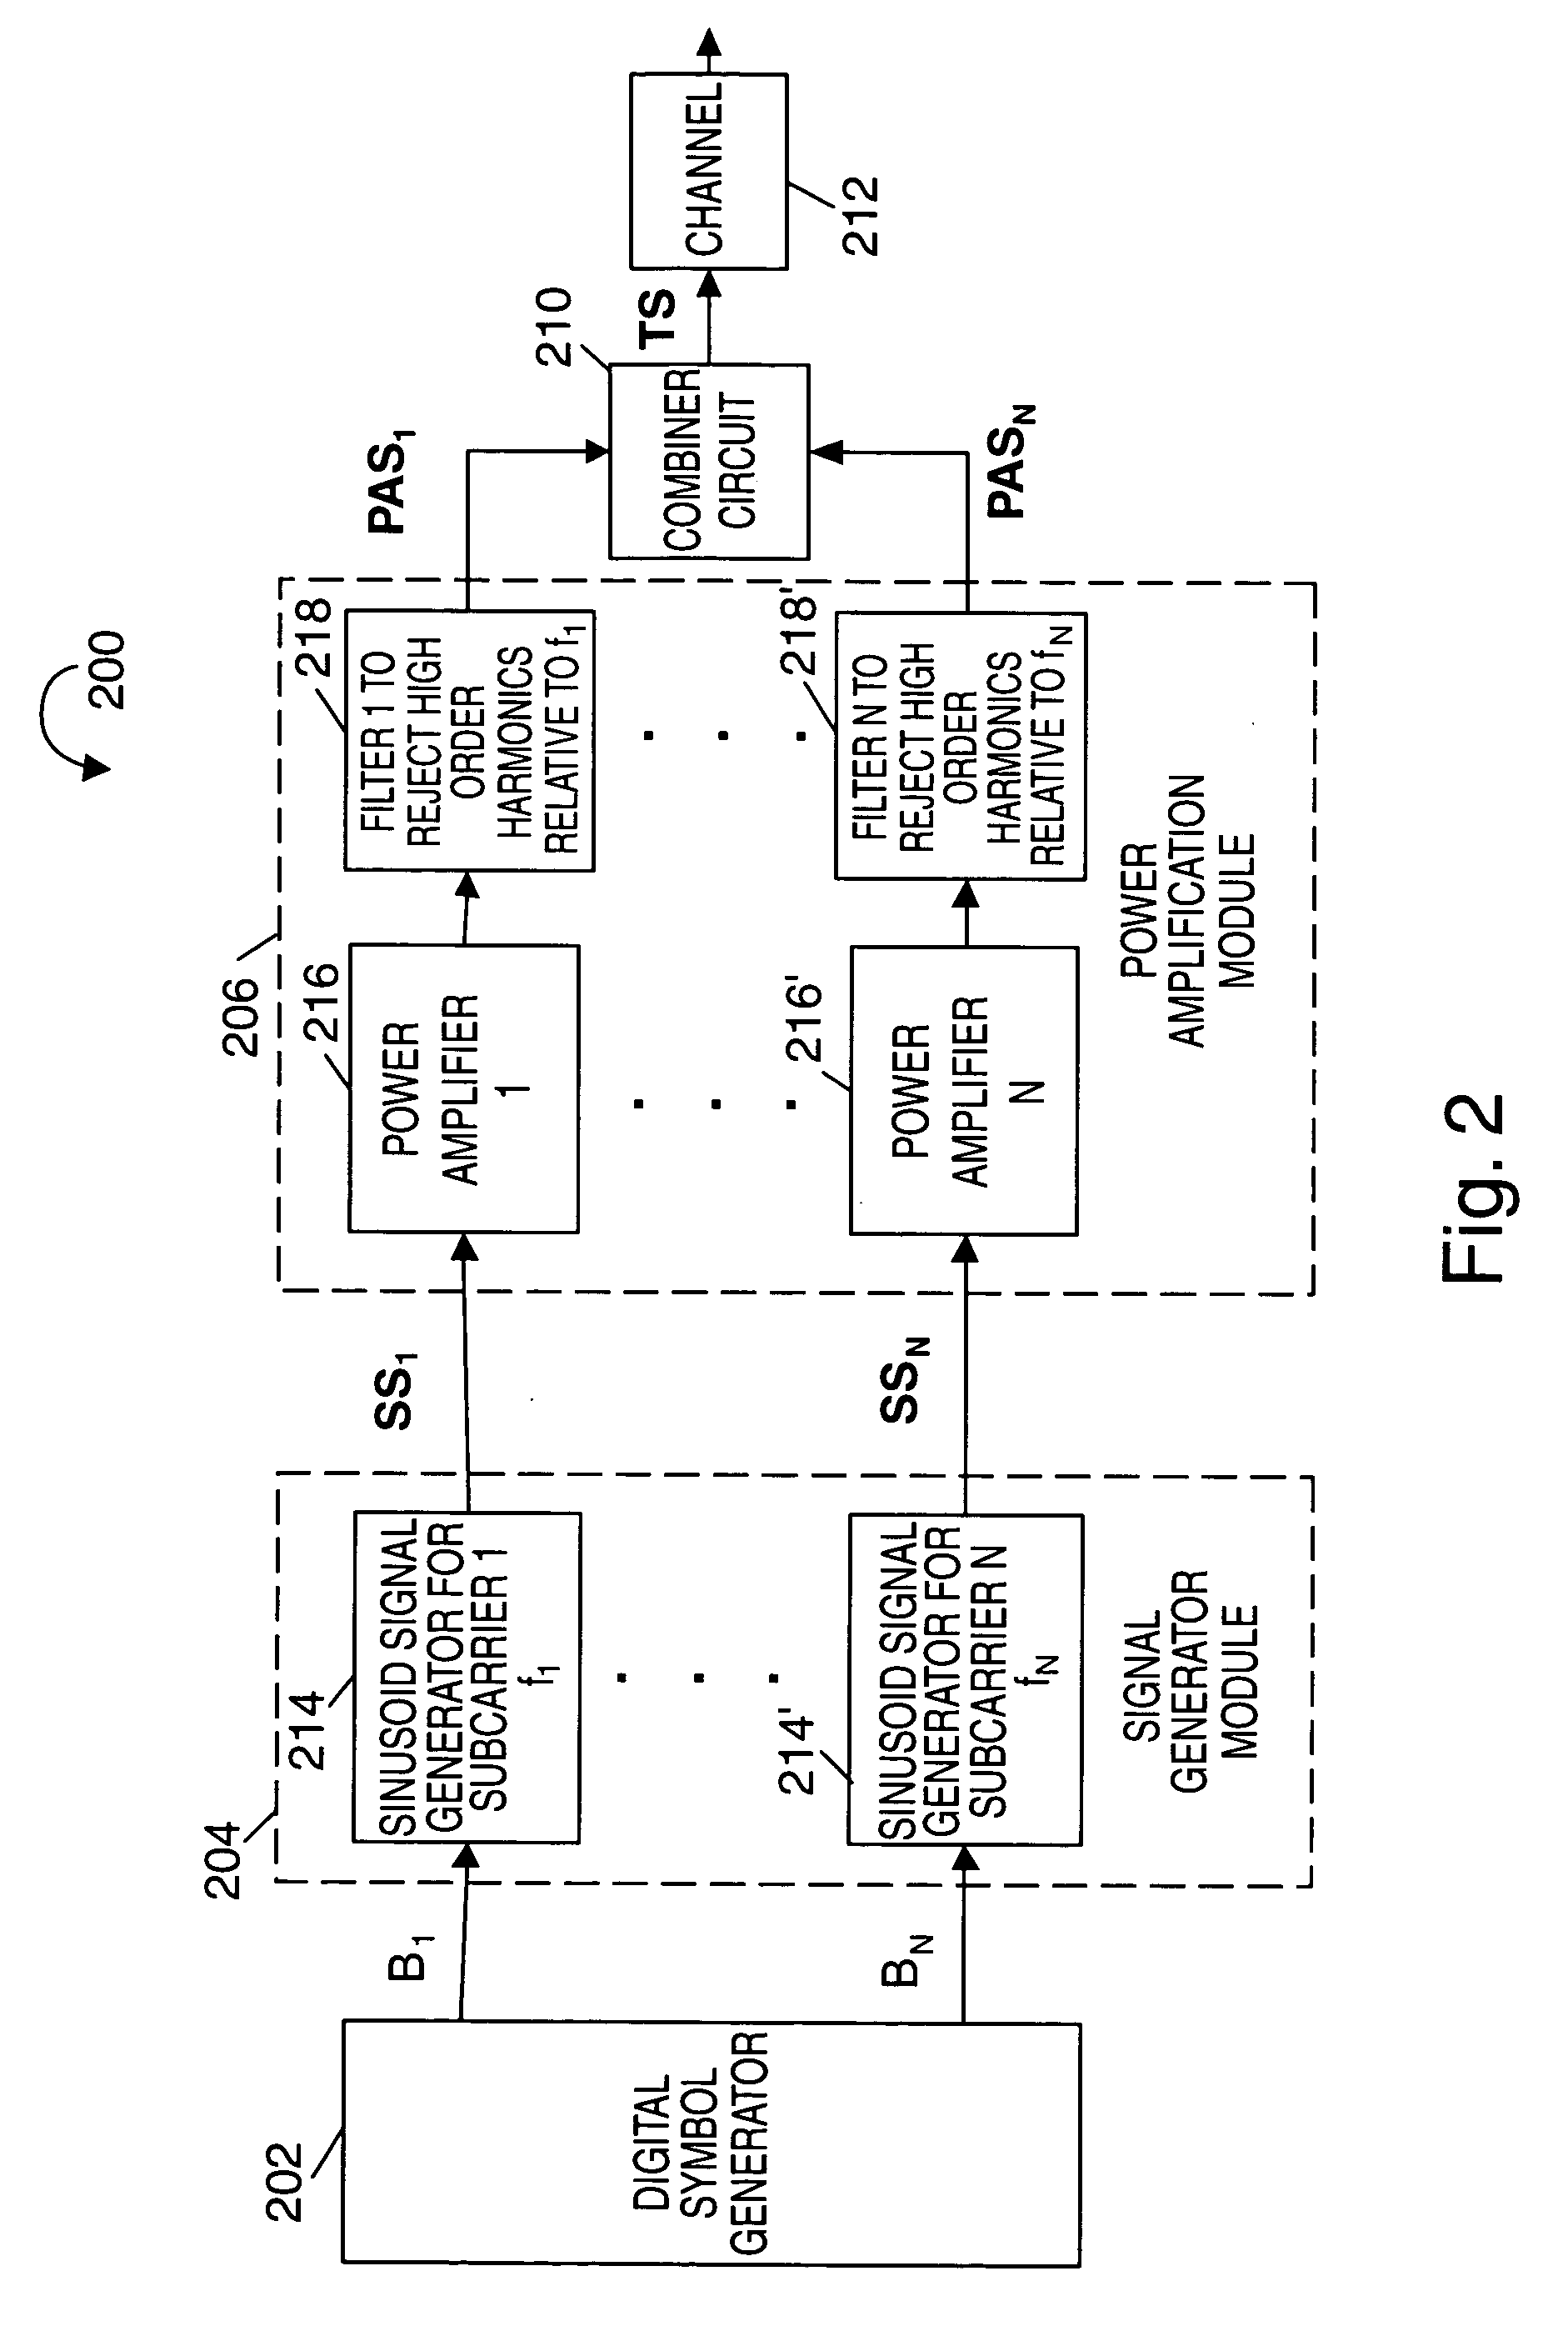 Methods for generating and transmitting frequency hopped signals